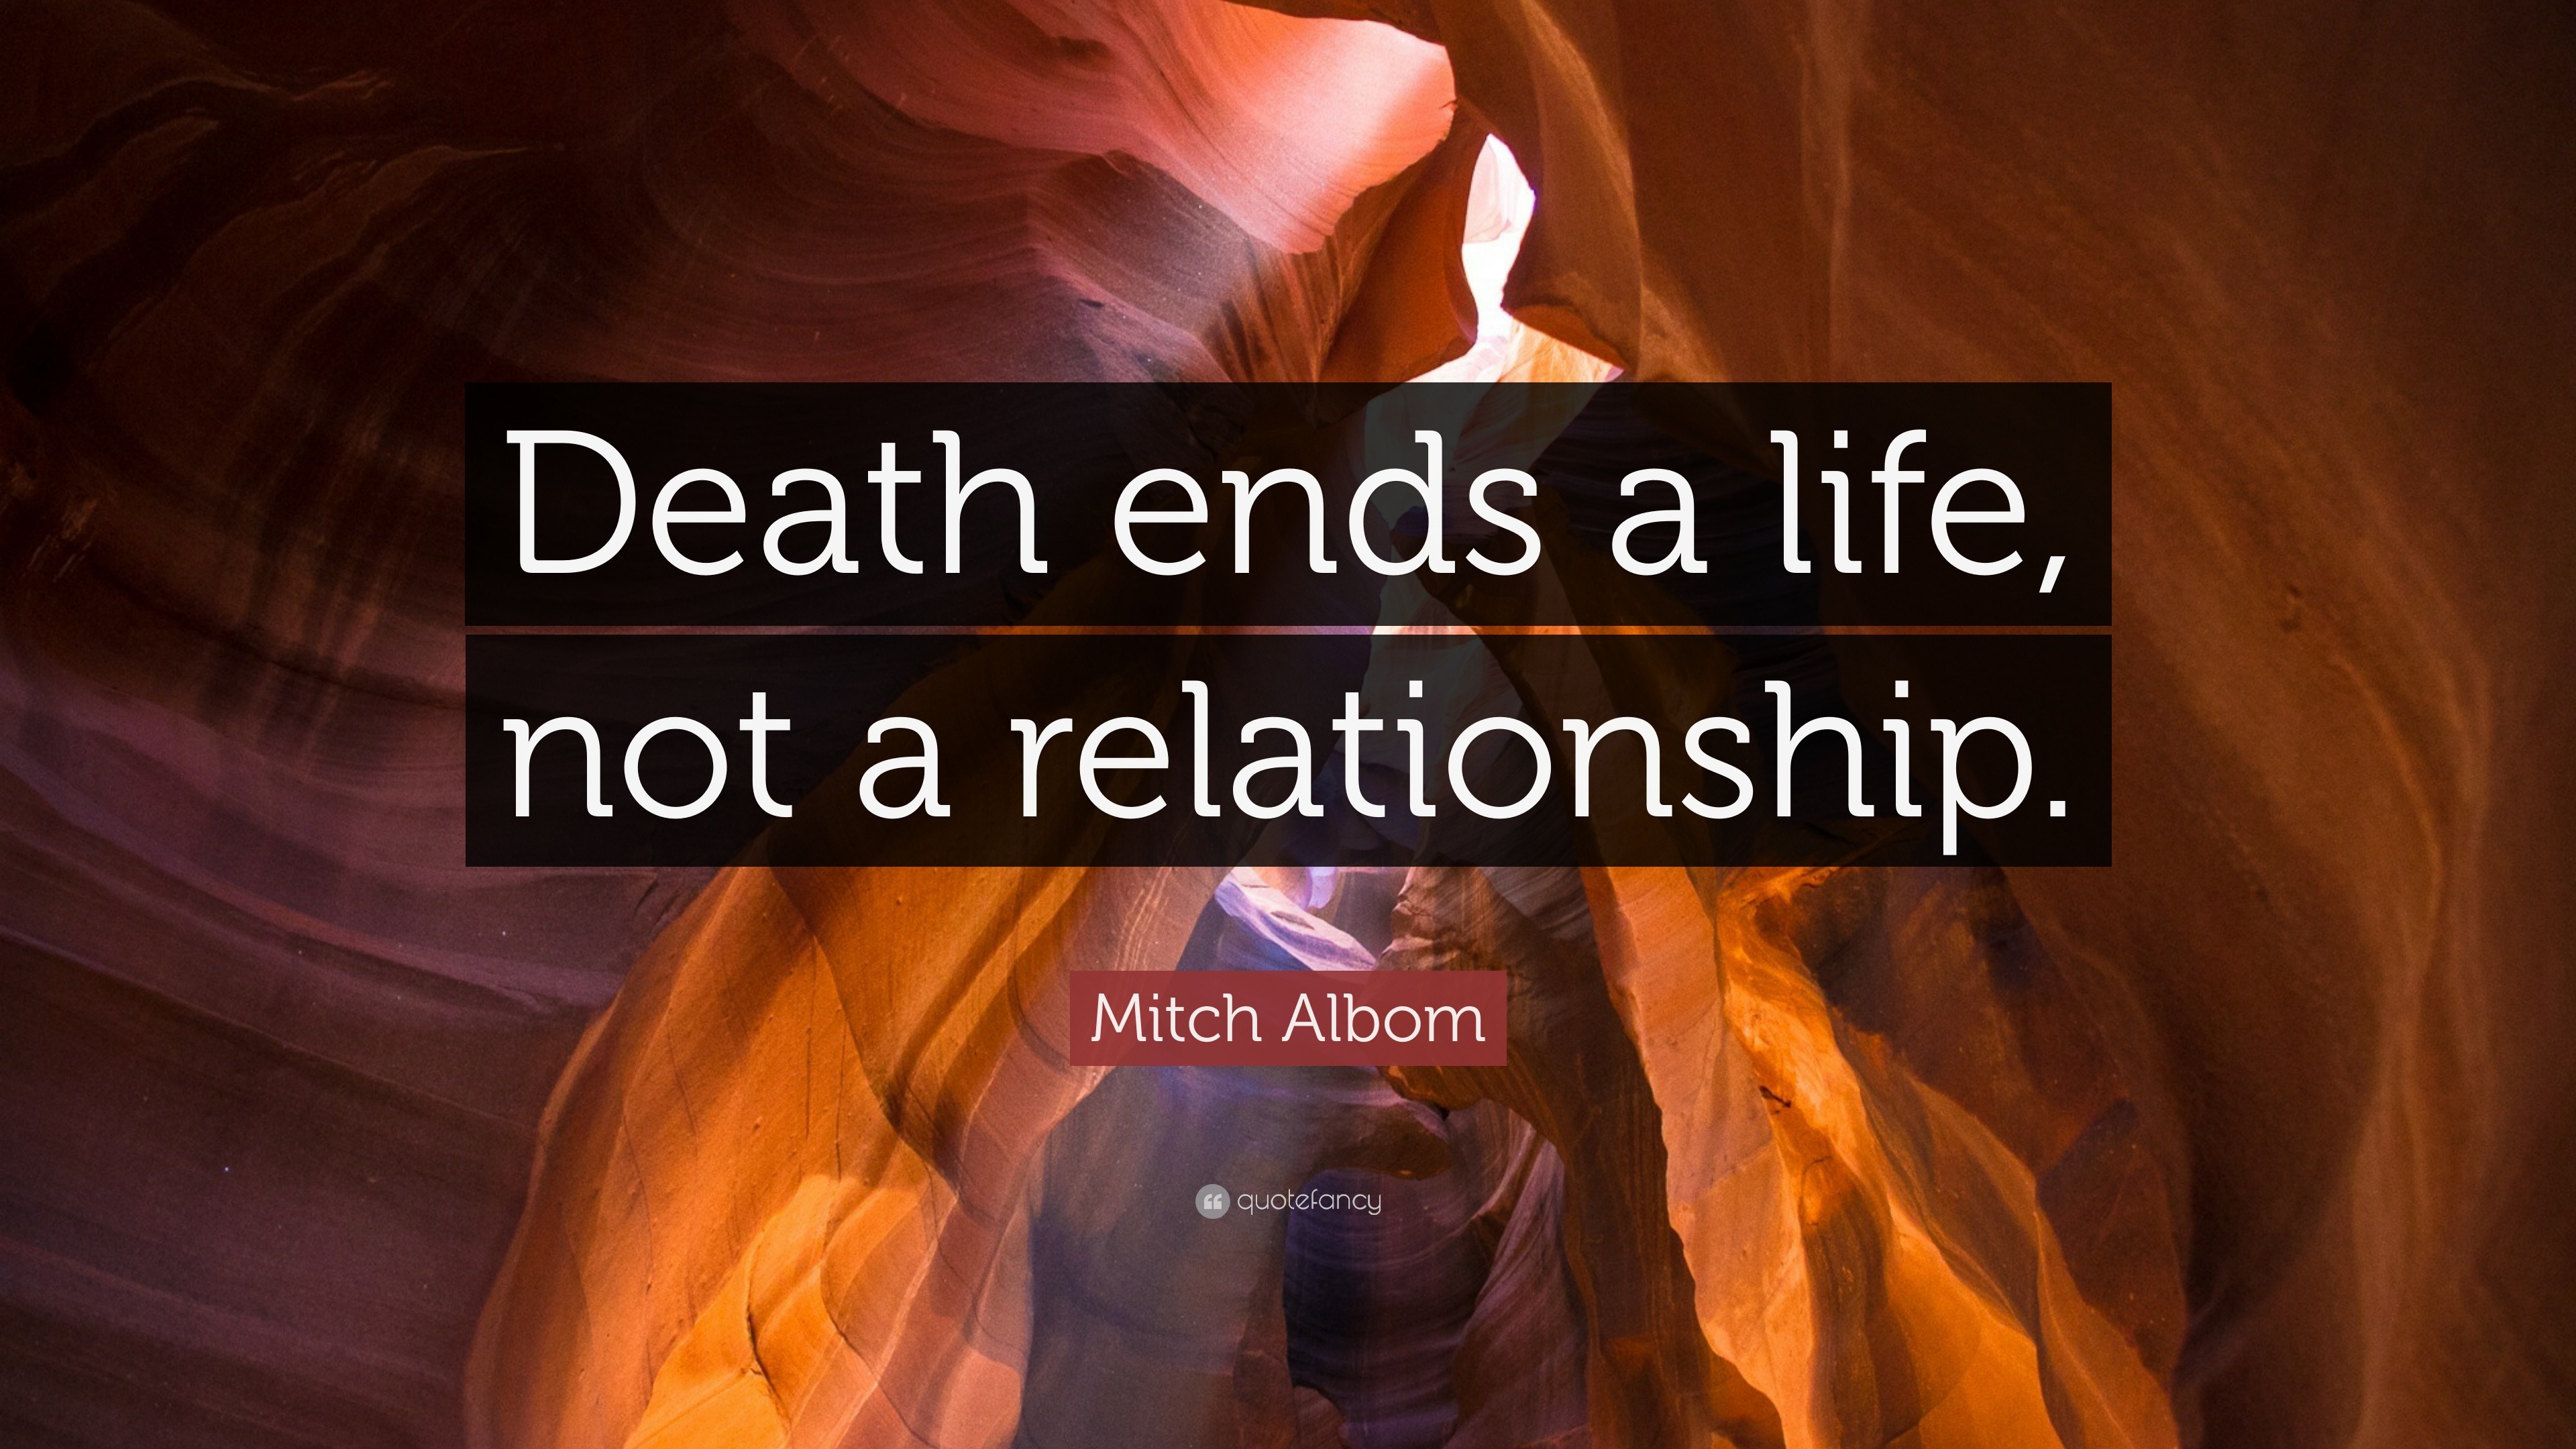 Mitch Albom Quote “Death ends a life, not a relationship